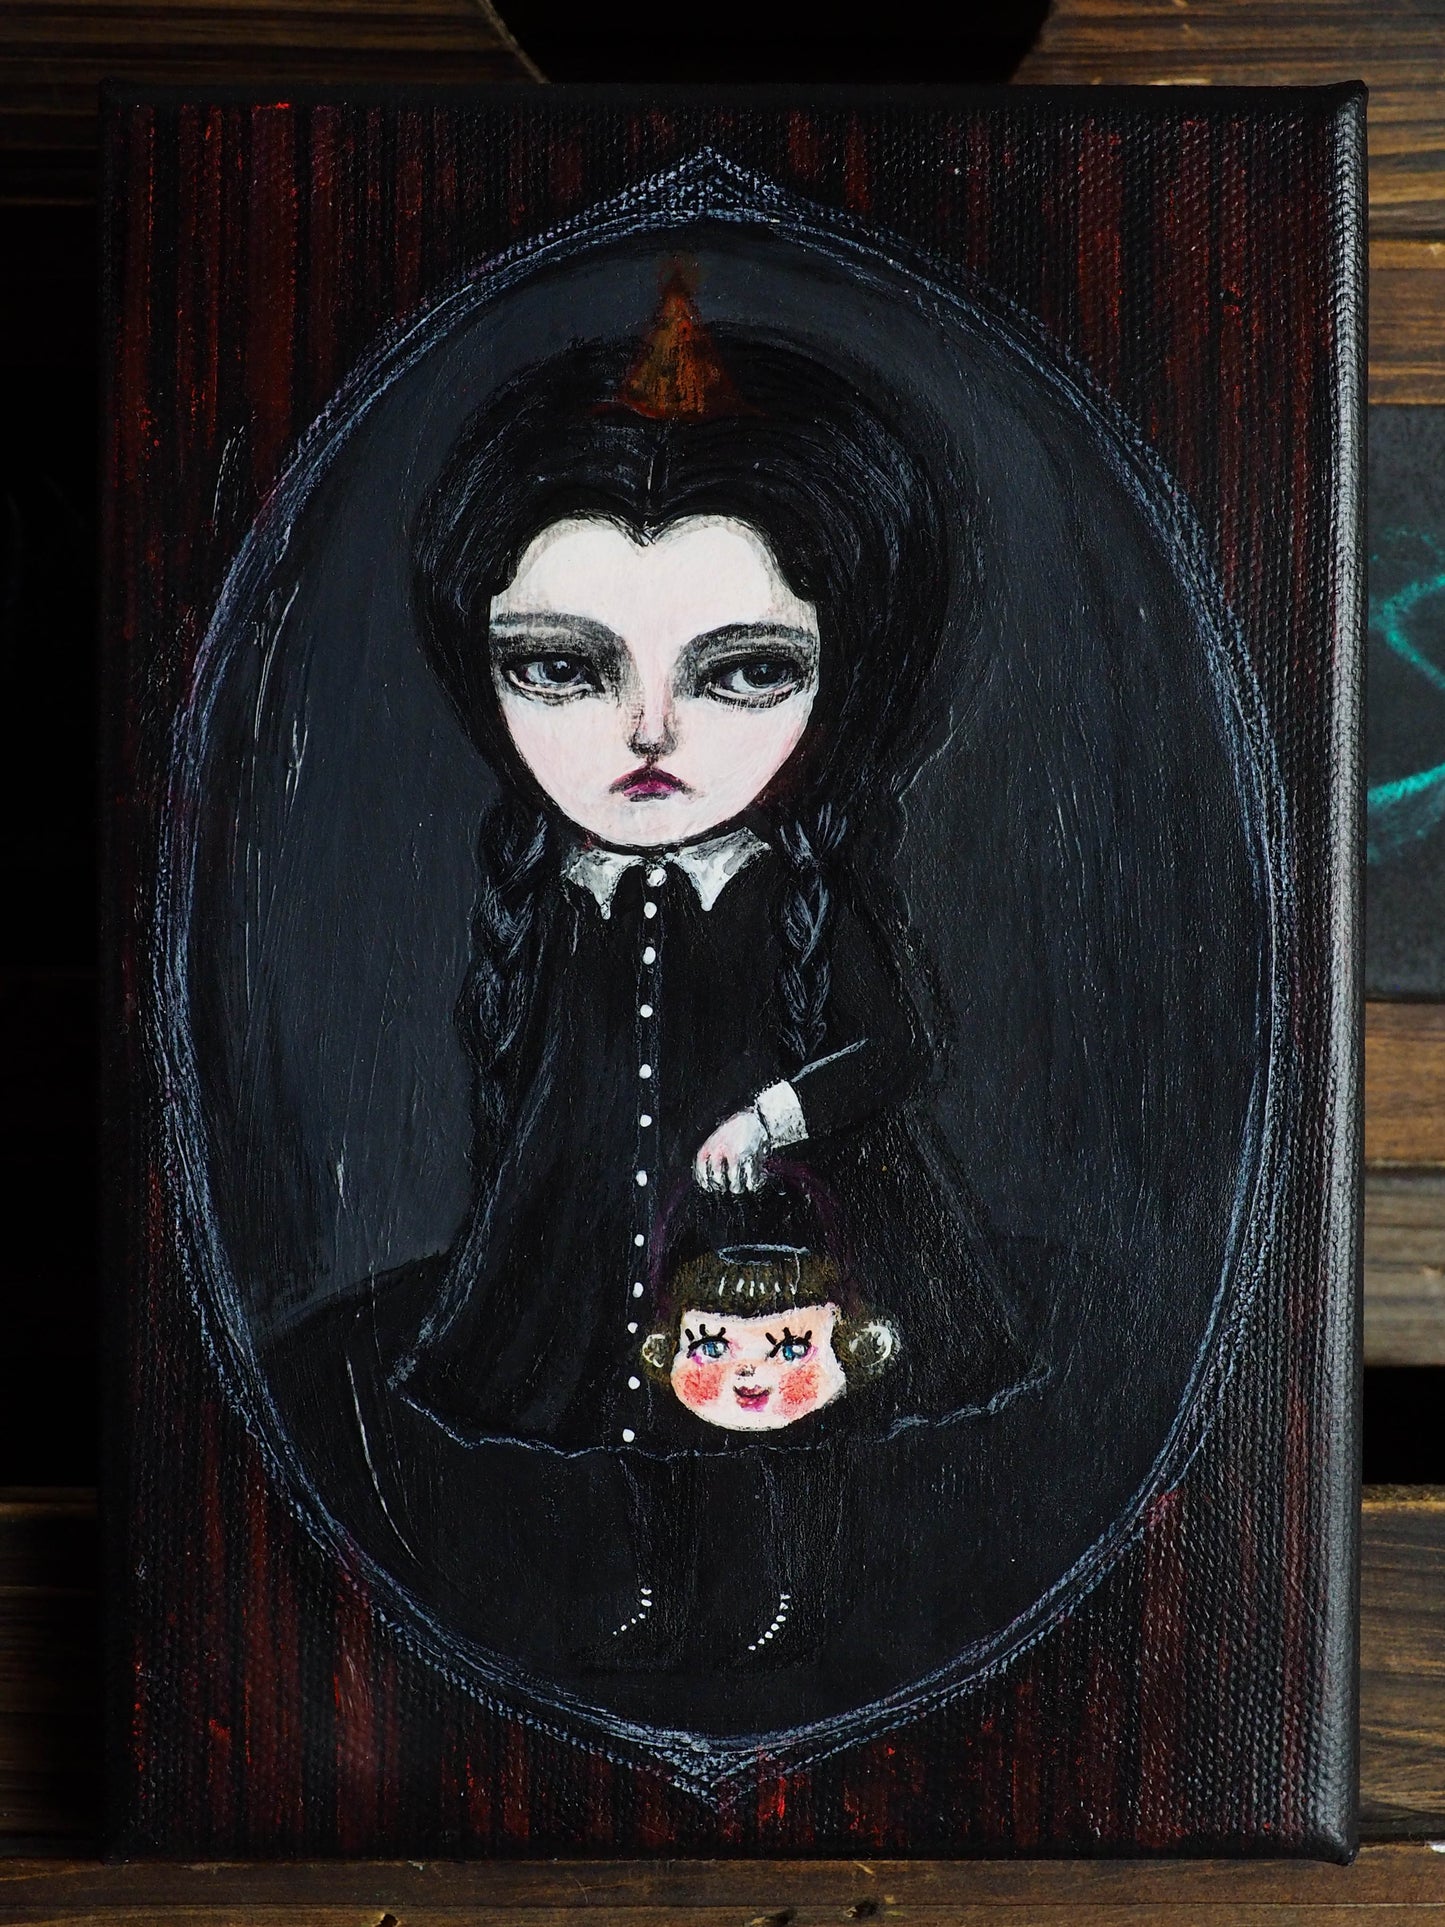 Wednesday Addams as an original mixed media Halloween art painting by Danita Art. The mysterious TV Character from the Addams Family is now a whimsical fan art illustration by Danita.